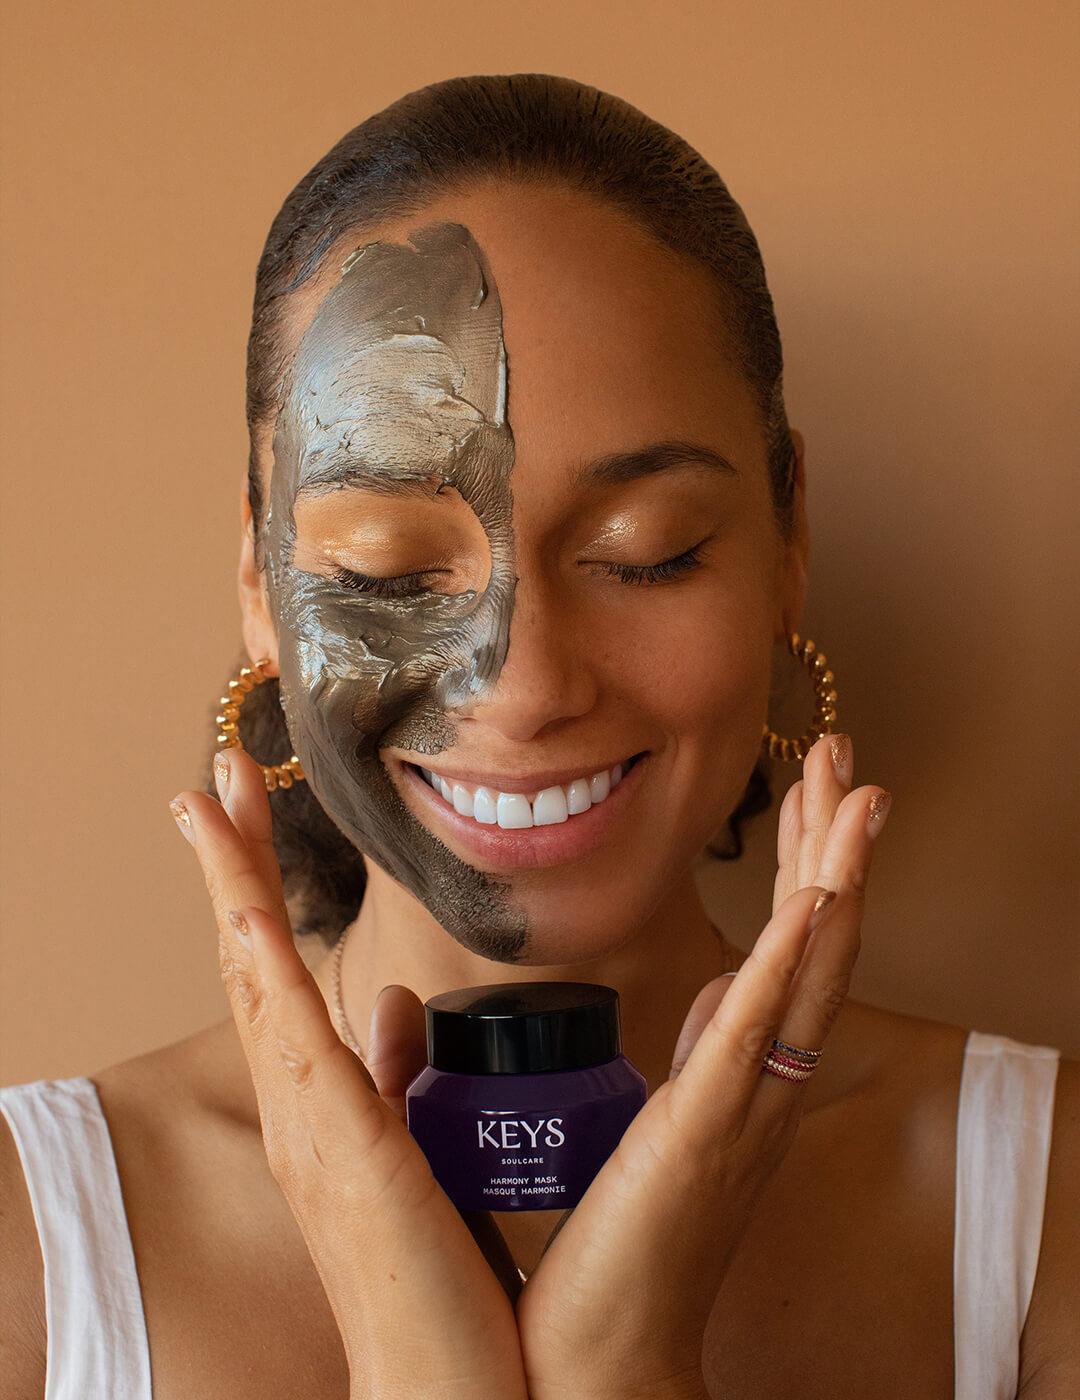 KEYS SOULCARE Founder Alicia Keys with mud mask on her face while holding KEYS SOULCARE Harmony Mask